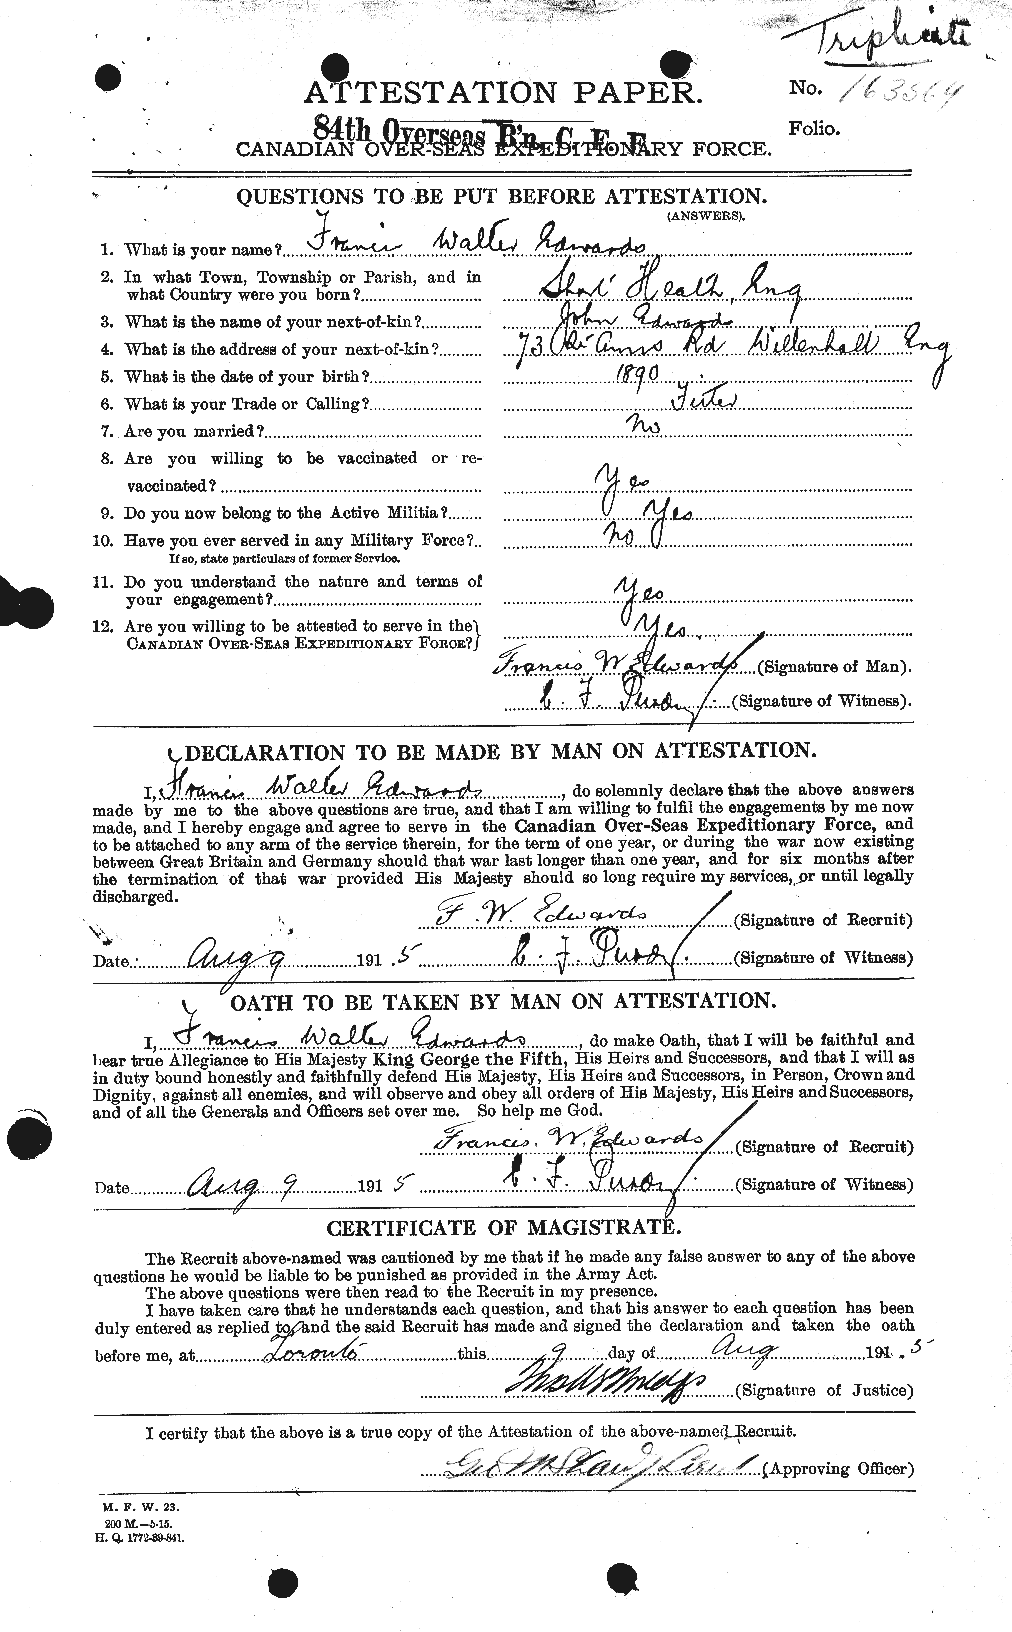 Personnel Records of the First World War - CEF 309038a